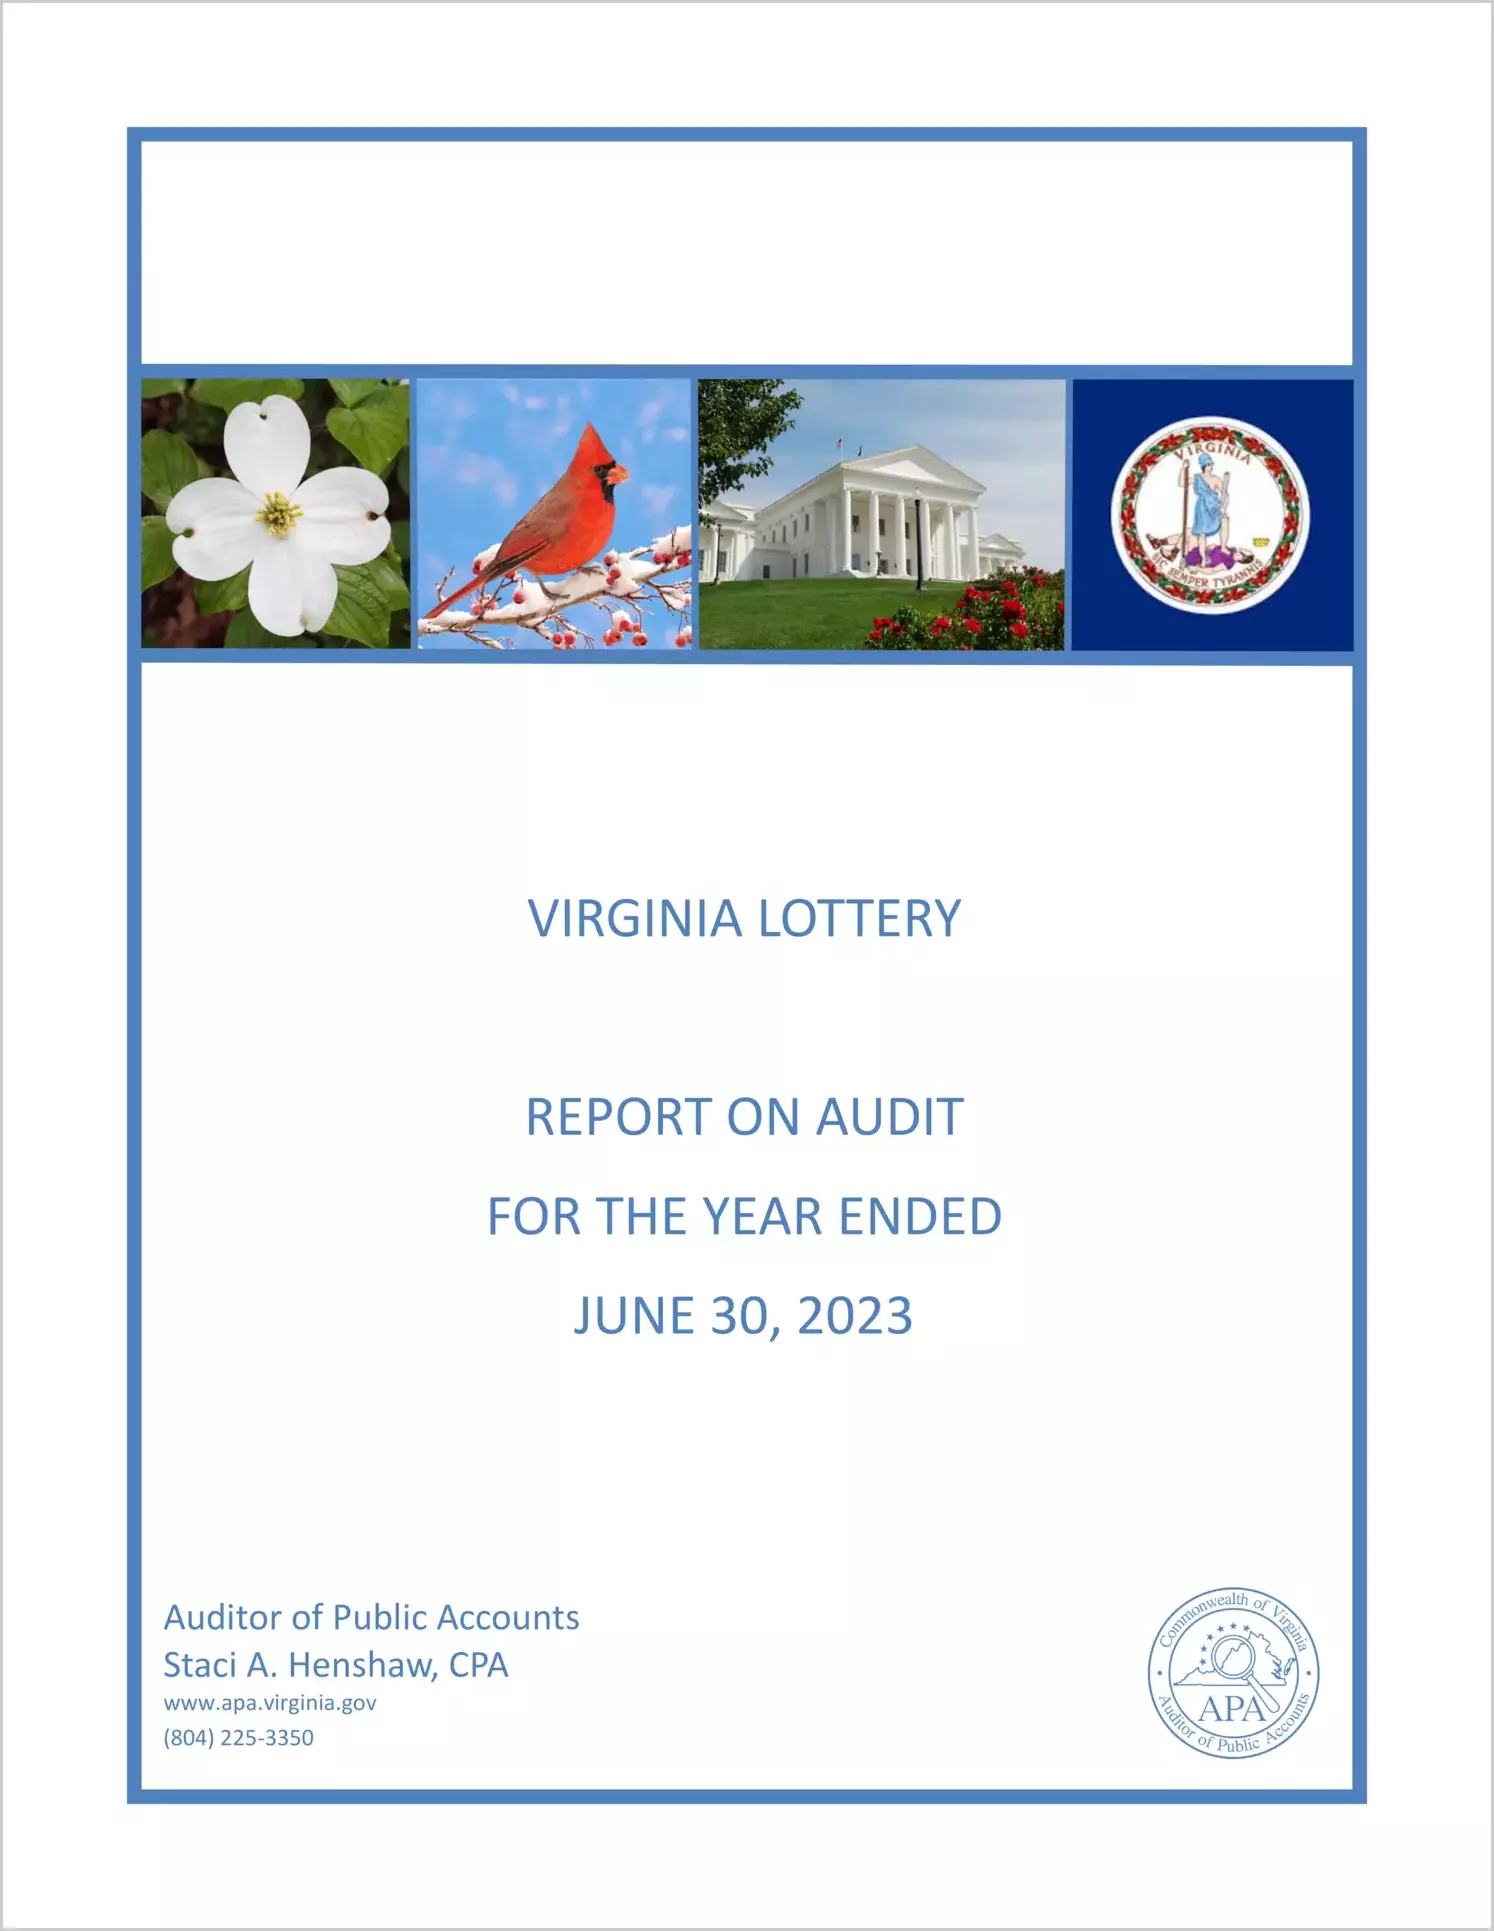 Virginia Lottery for the year ended June 30, 2023